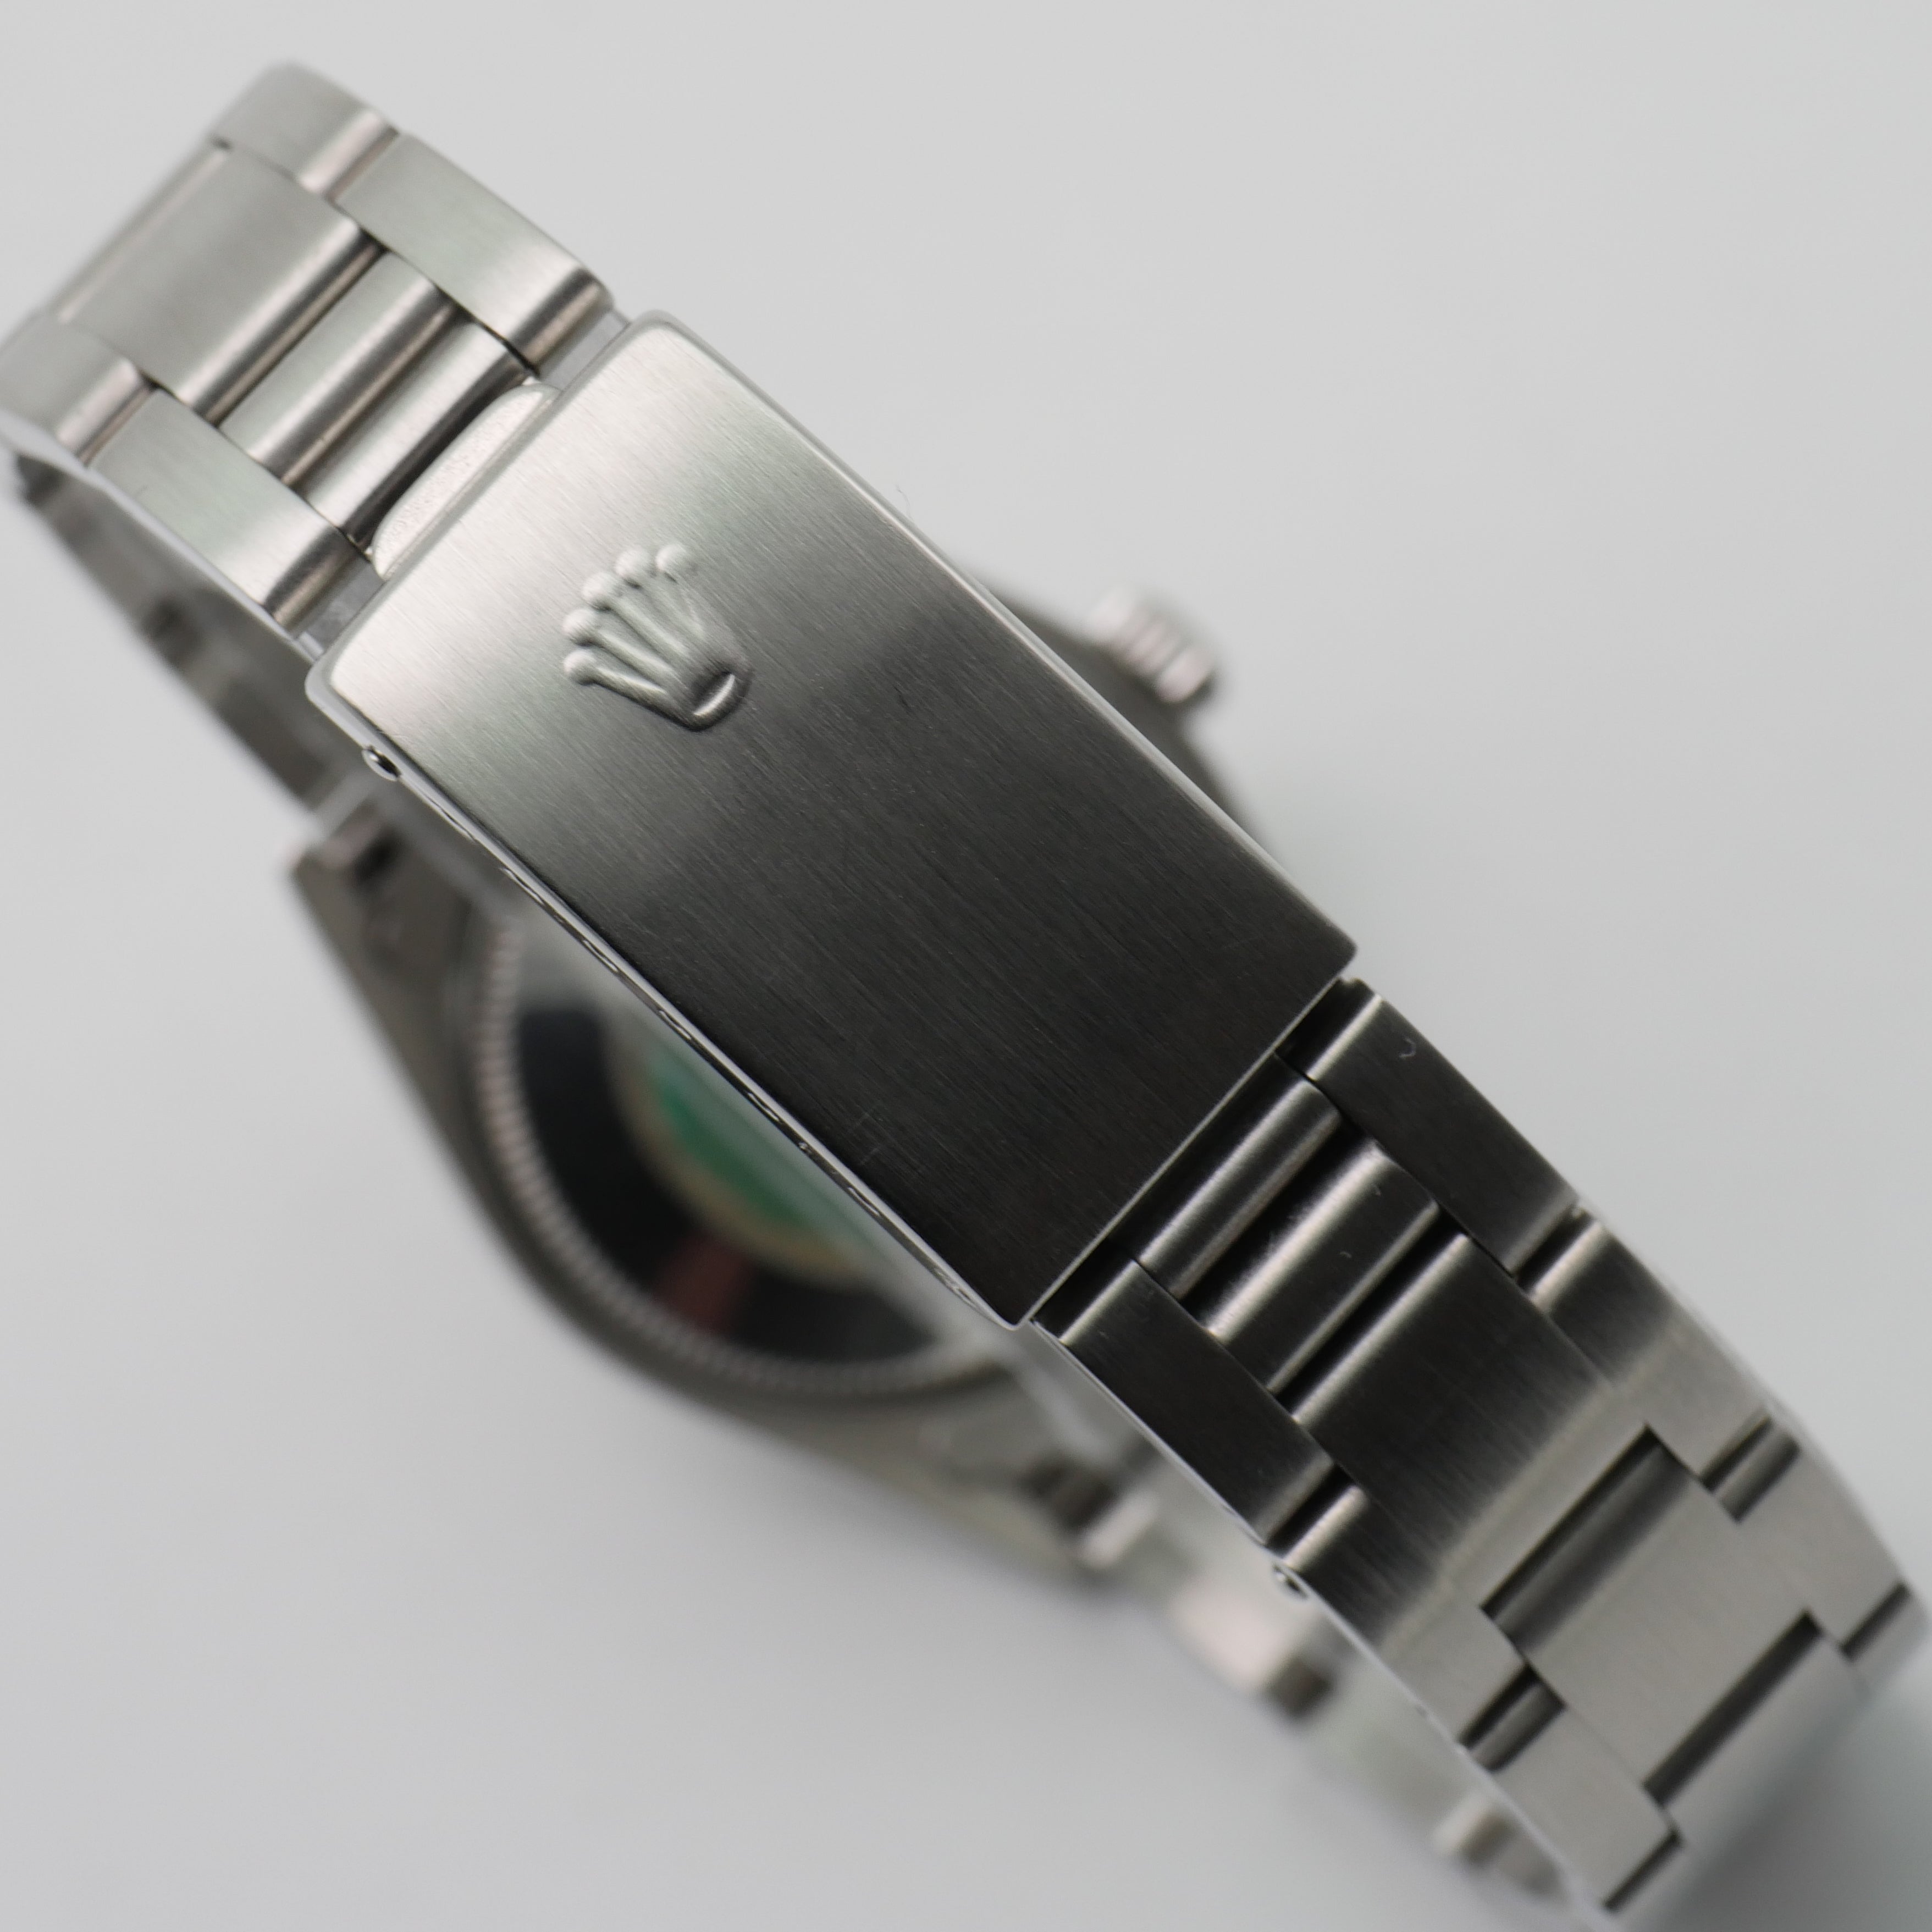 Rolex Oyster Perpetual 31mm Stahl 67480 - 1998